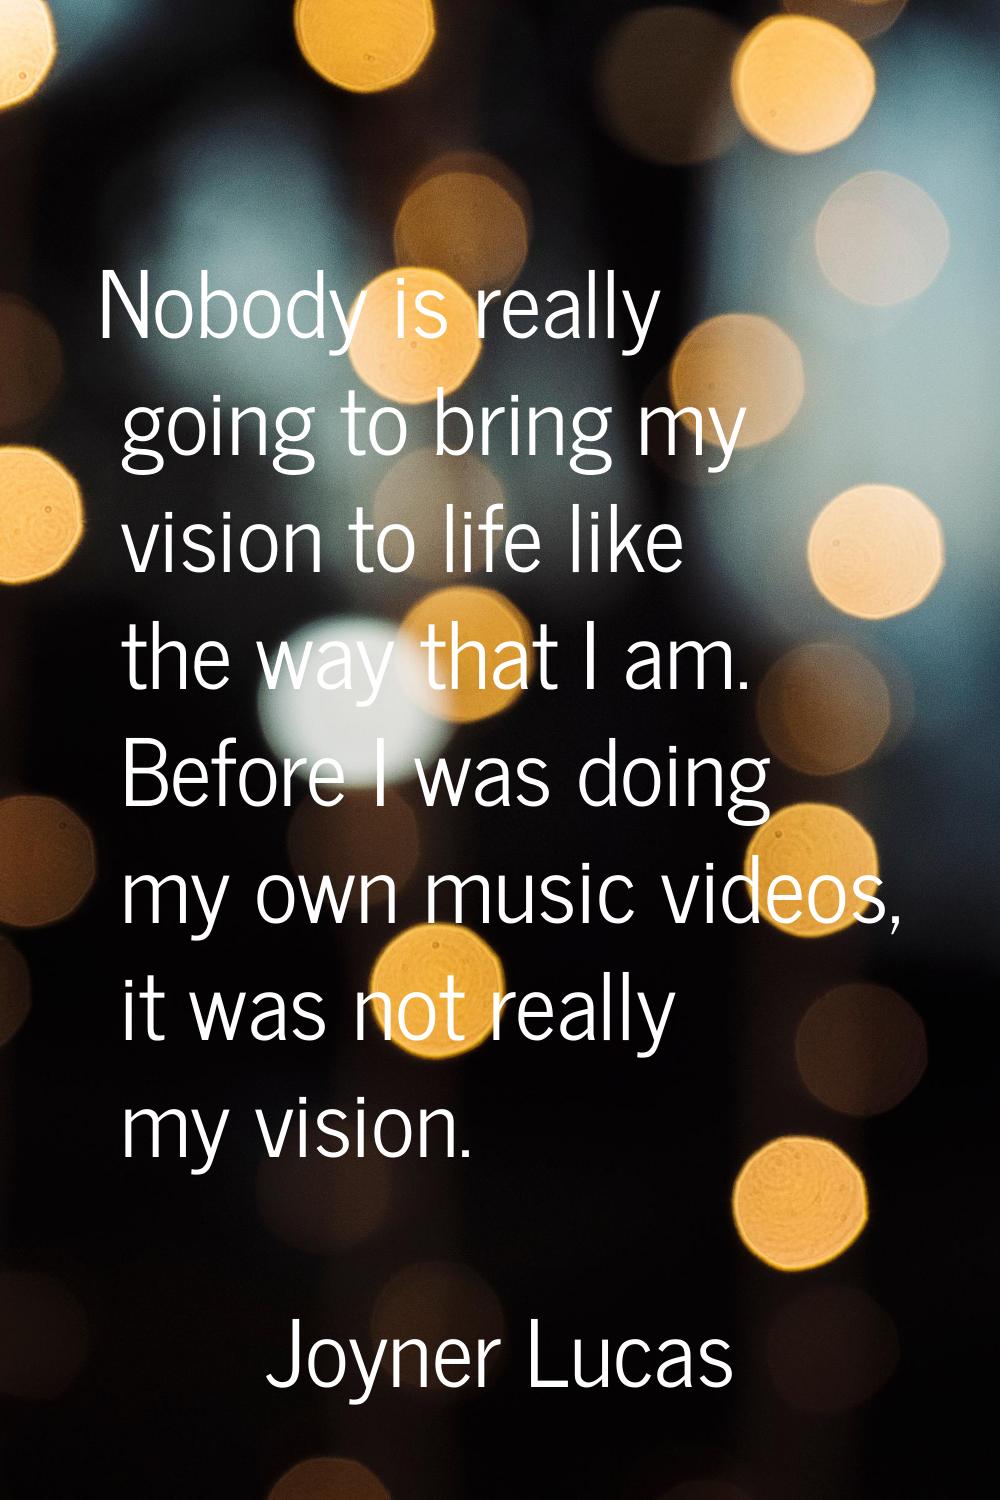 Nobody is really going to bring my vision to life like the way that I am. Before I was doing my own